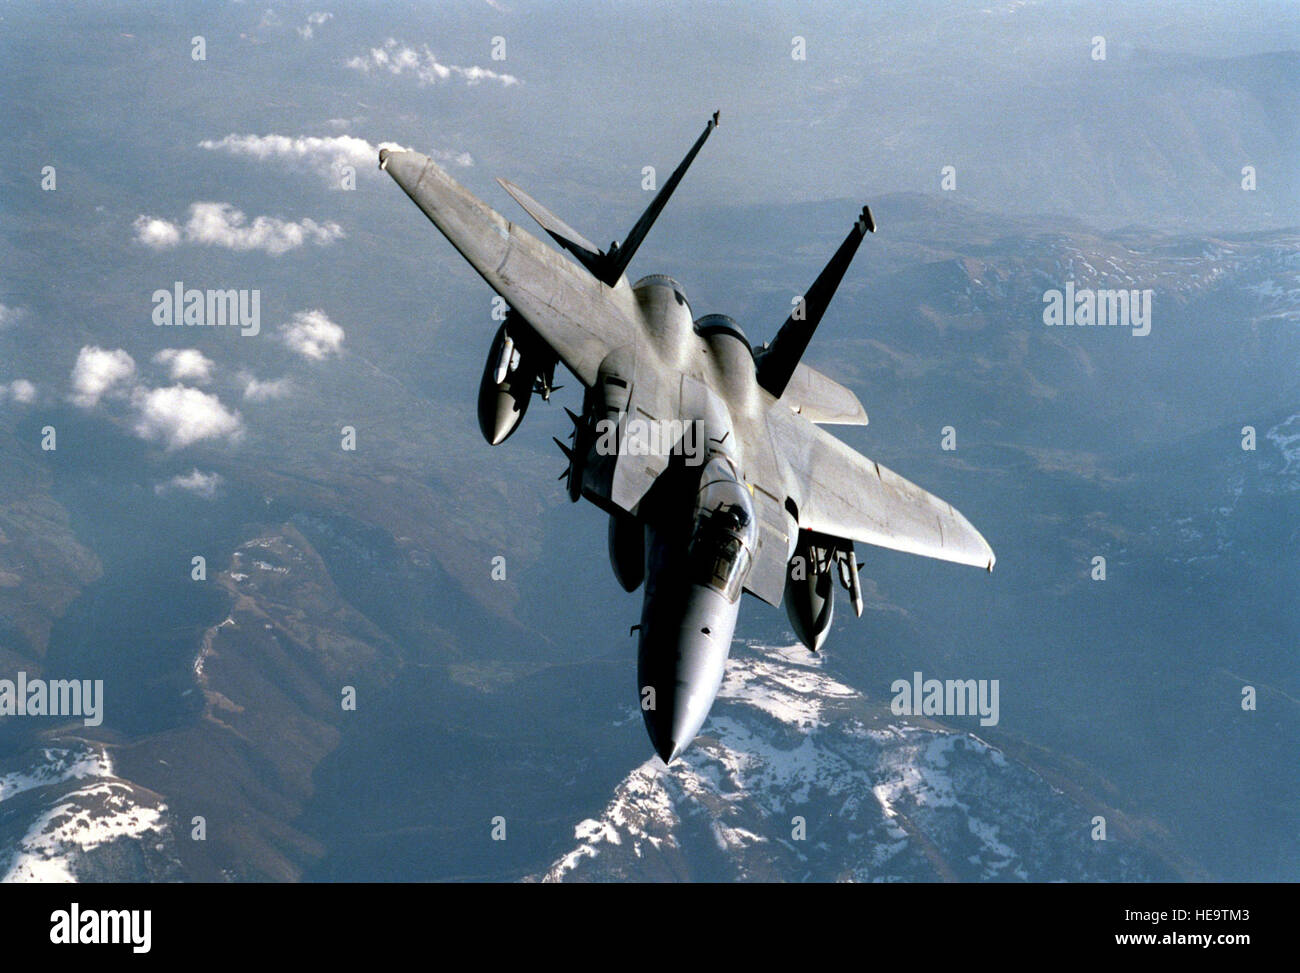 990404-F-0024F-018 An F-15C Eagle breaks away from a KC-135R Stratotanker after in-flight refueling during NATO Operation Allied Force on April 4, 1999.  Operation Allied Force is the air operation against targets in the Federal Republic of Yugoslavia.  The Eagle is armed with AIM-7 Sparrow missiles on the fuselage, AIM-9 Sidewinder missiles on the inboard wing pylon and AIM-120 Advanced Medium Range Air-to-Air Missiles on the outboard wing pylon. F-15C Eagles are flying Combat Air Patrol missions to maintain air superiority and protect aircraft in Allied Force.  The Eagle is from the 48th Fig Stock Photo